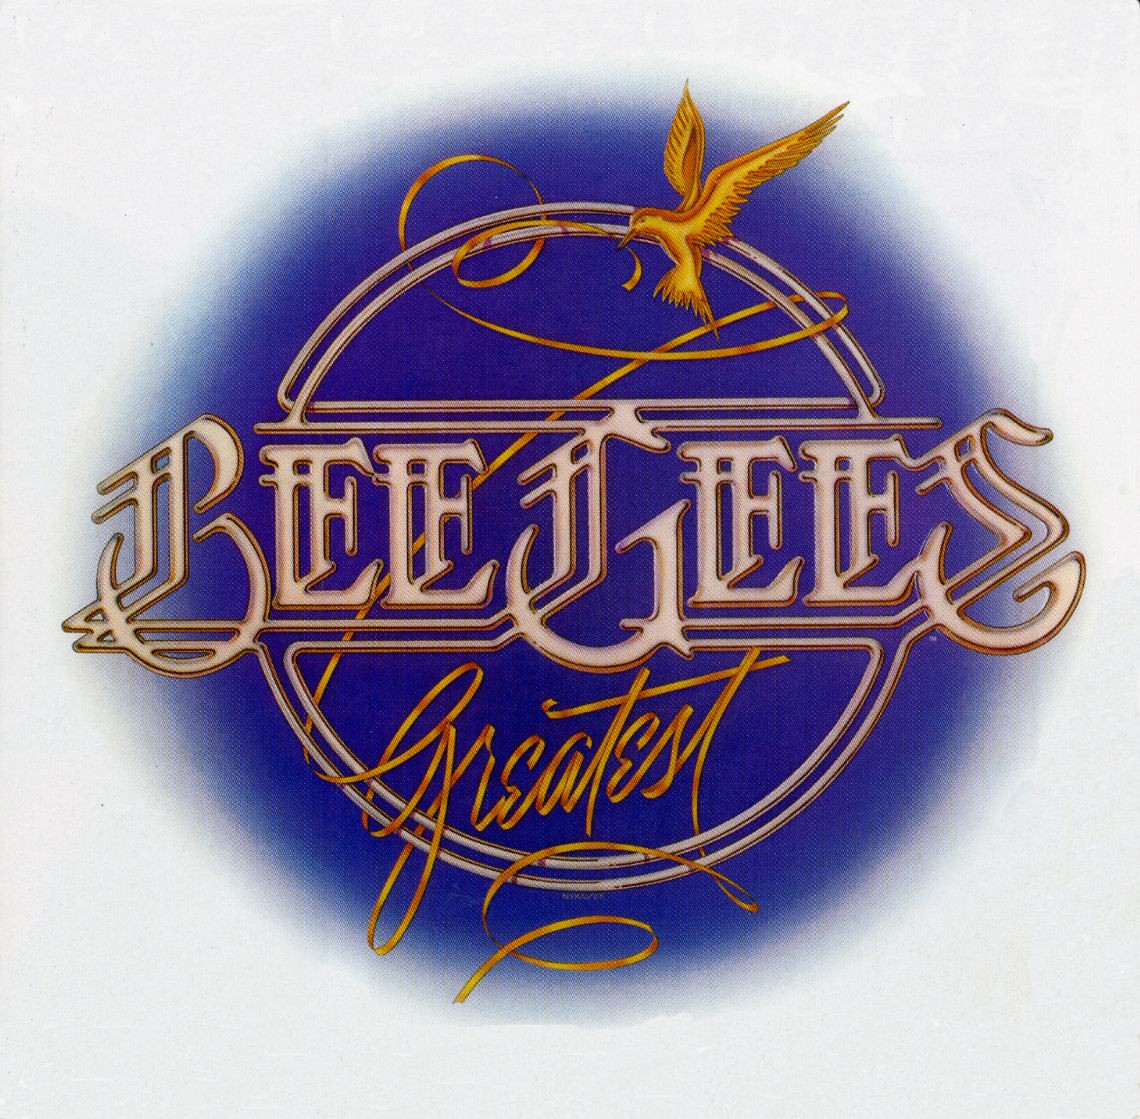 [The+Bee+Gees+-+Greatest+(Special+Edition)+-+frente.jpg]